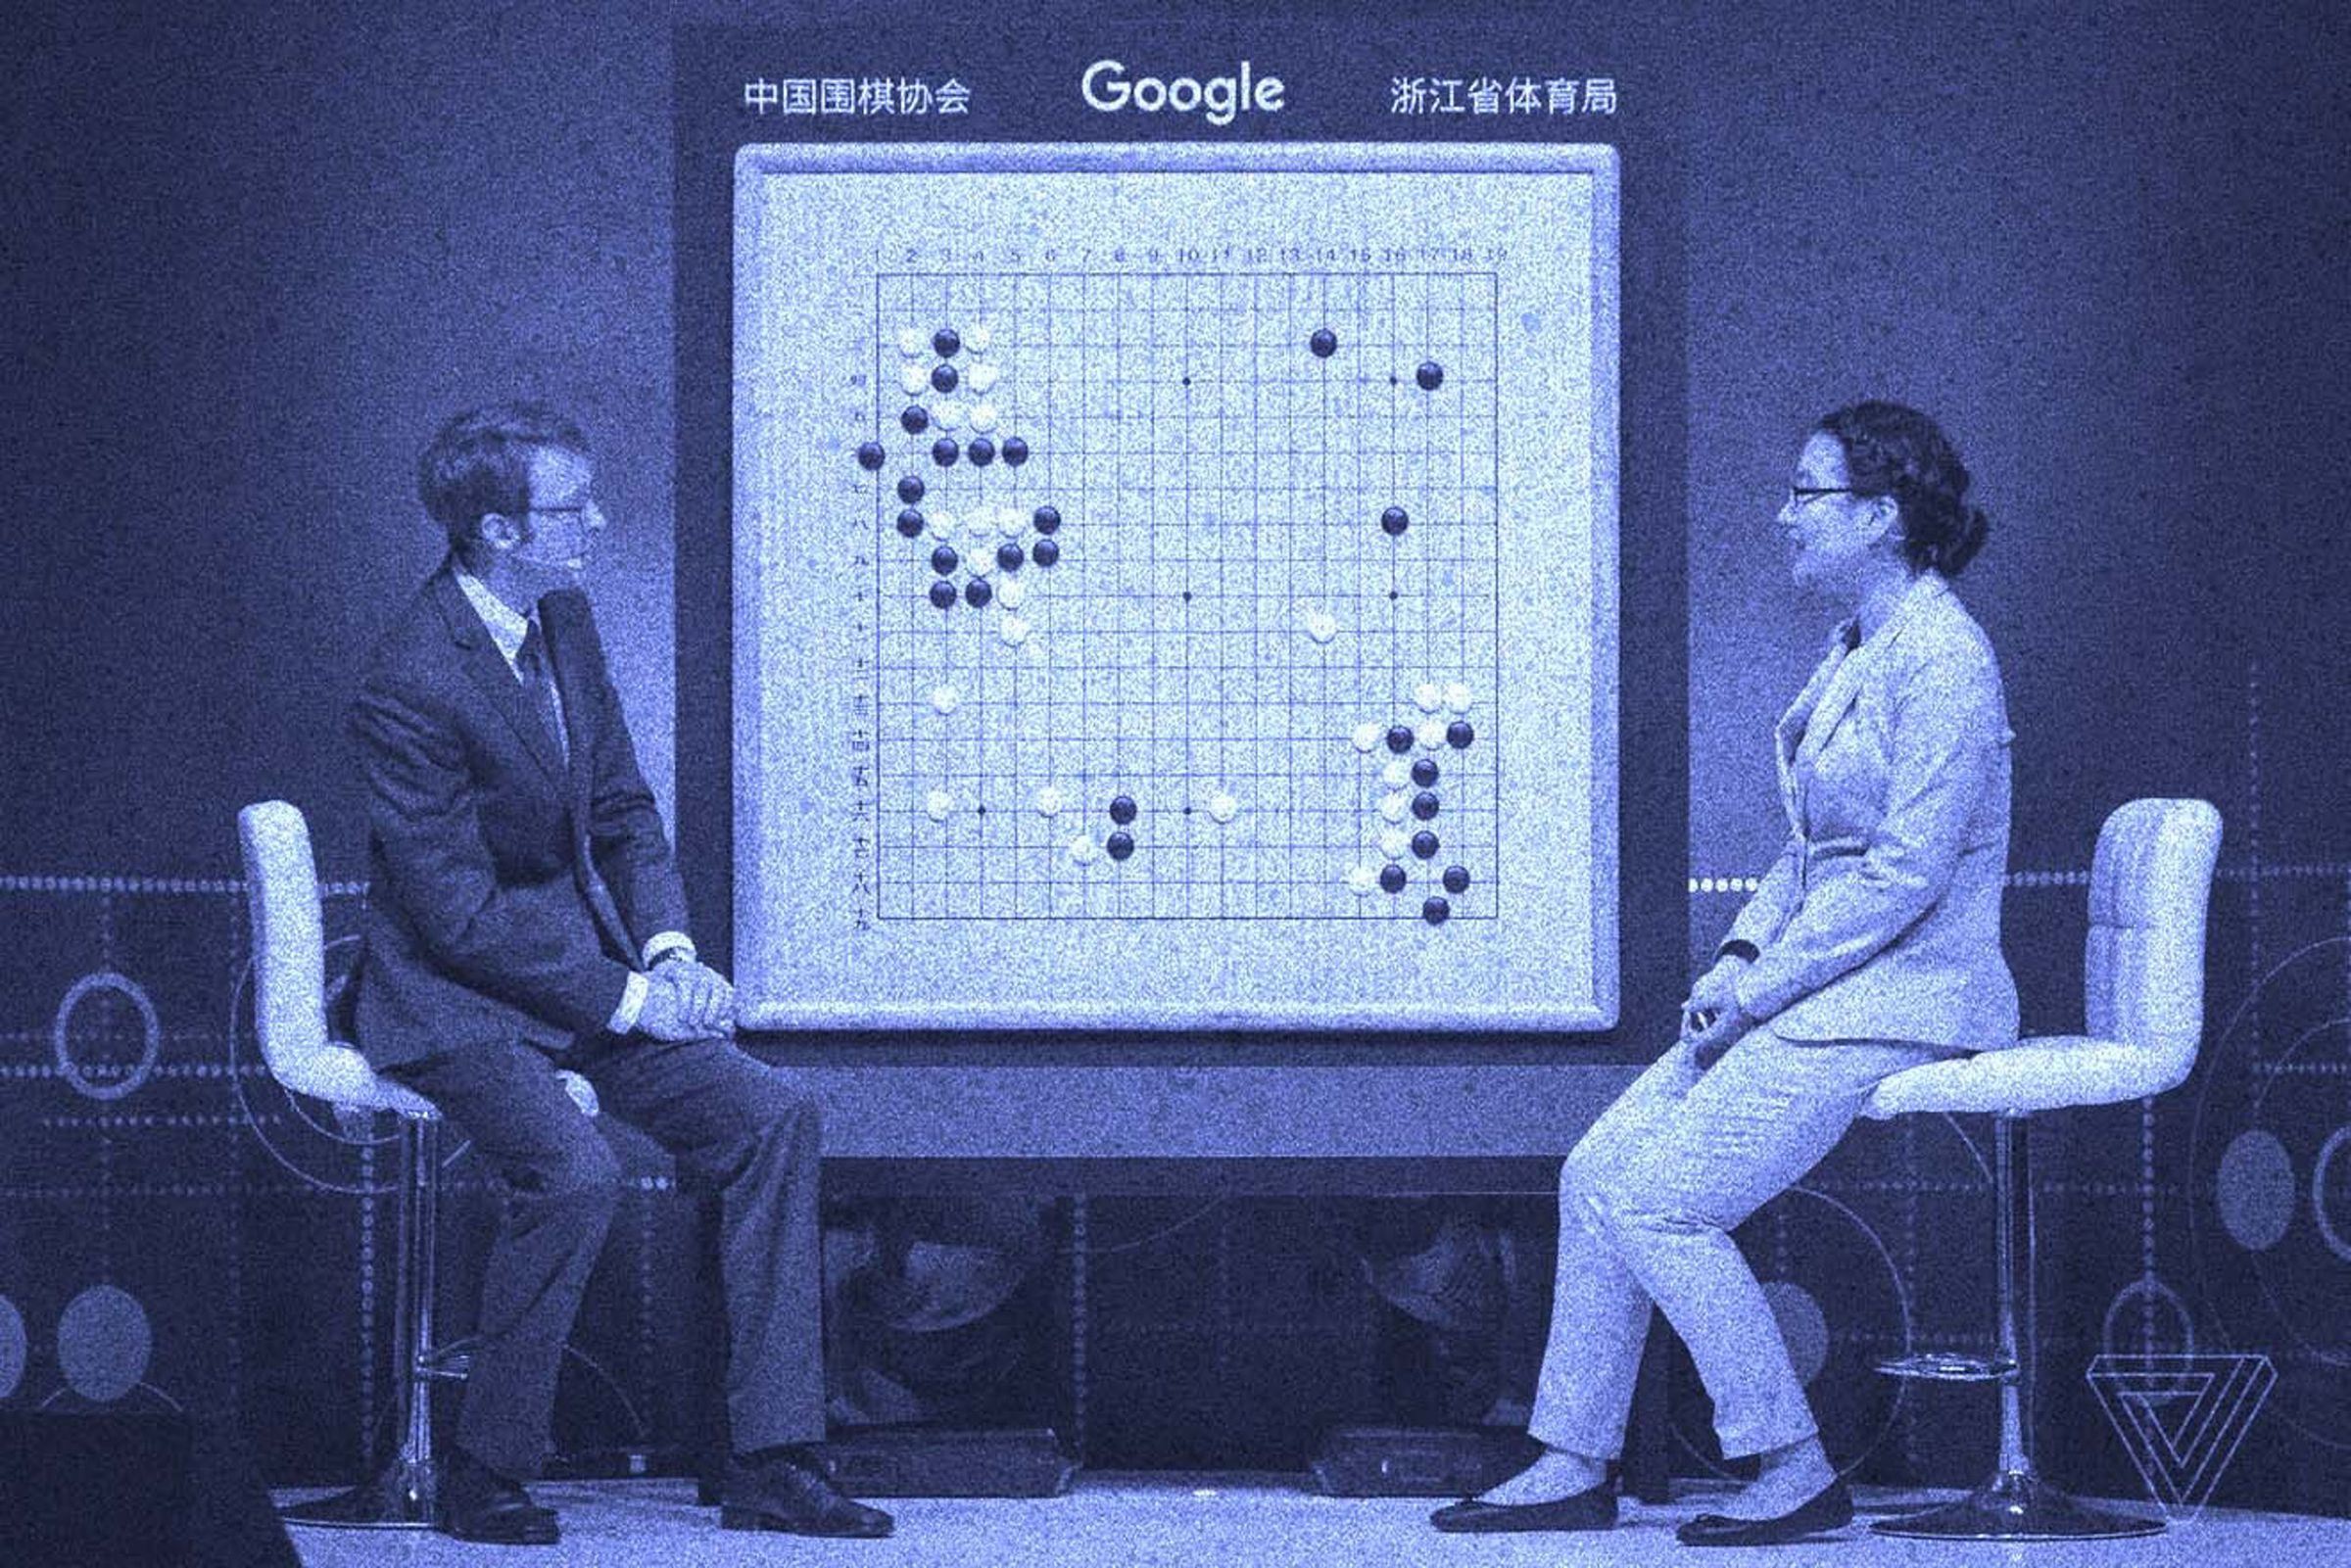 Andrew Jackson and Lee Ha-jin discuss AlphaGo’s first game against top Go player Ke Jie at the Future of Go Summit in Wuzhen, China in 2017.